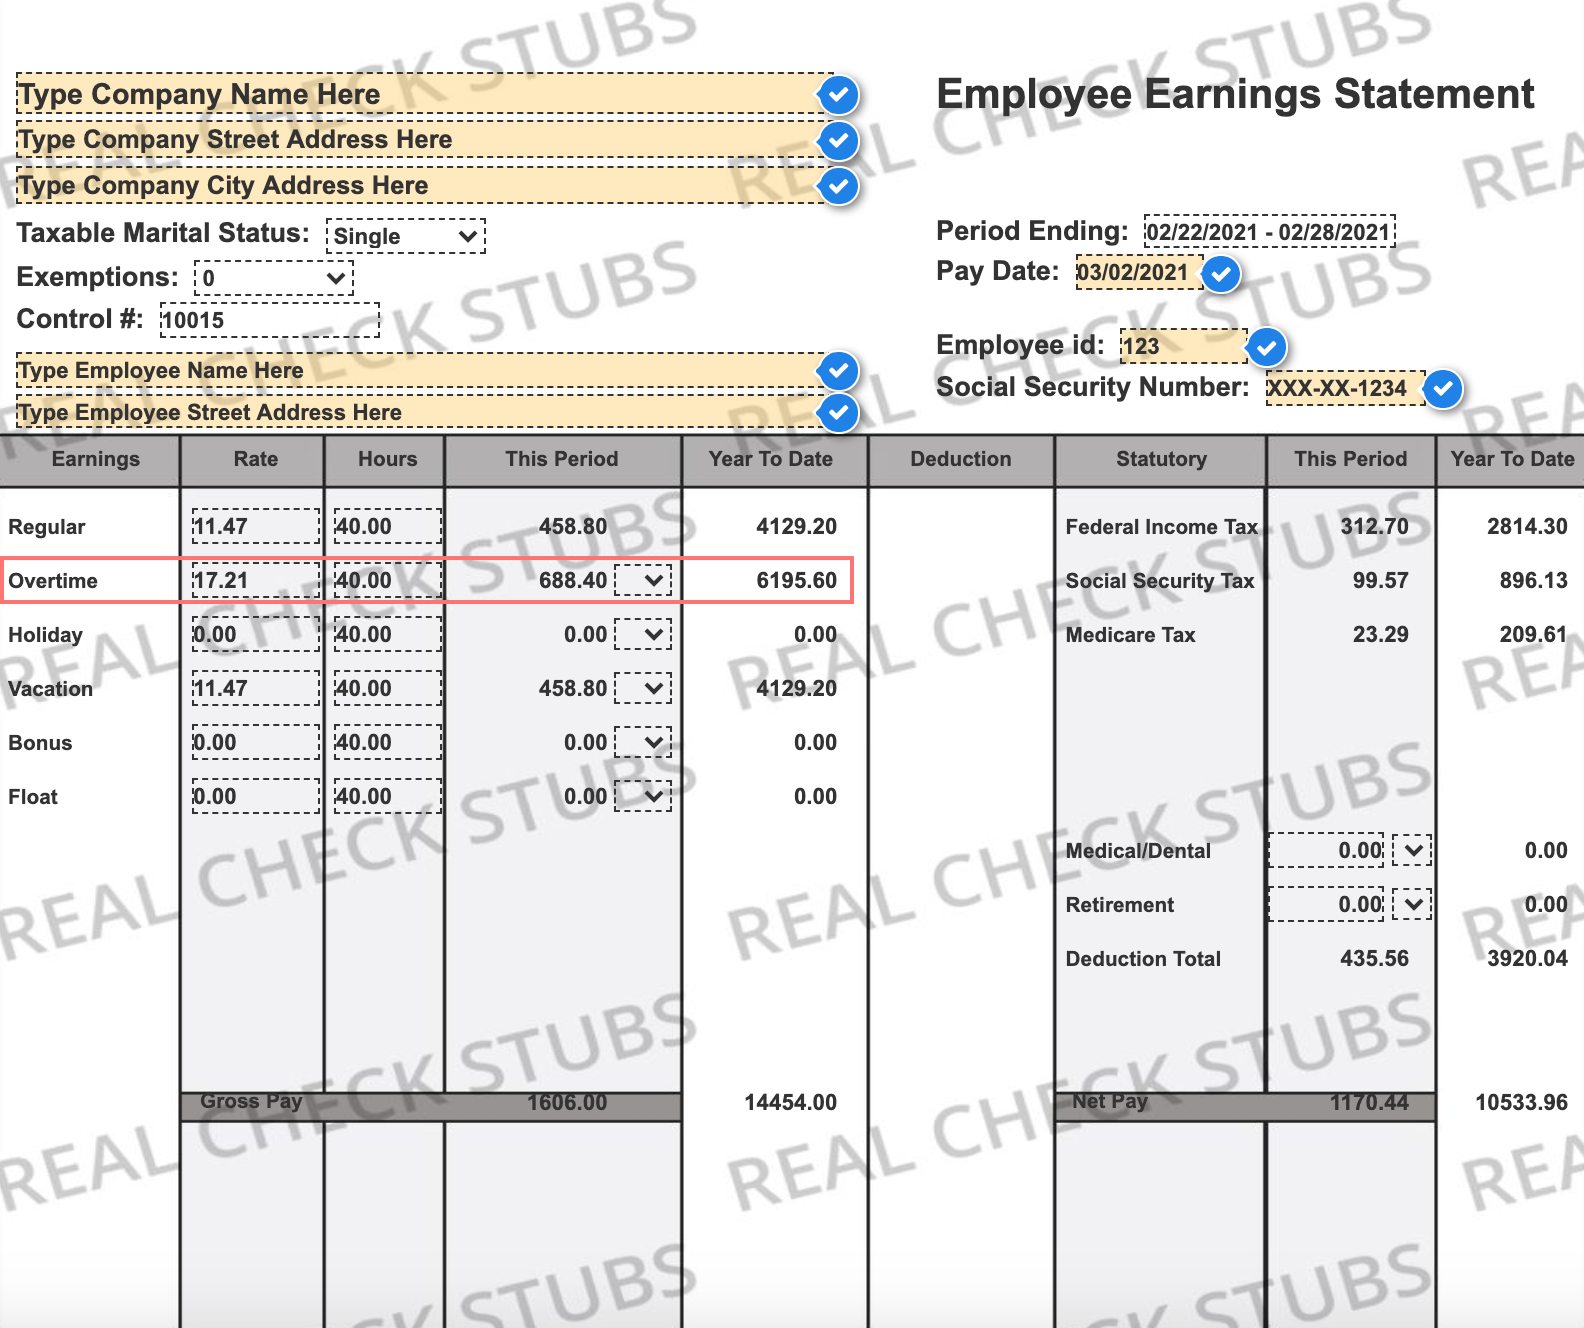 Advanced Pay Stub Template 2 with overtime